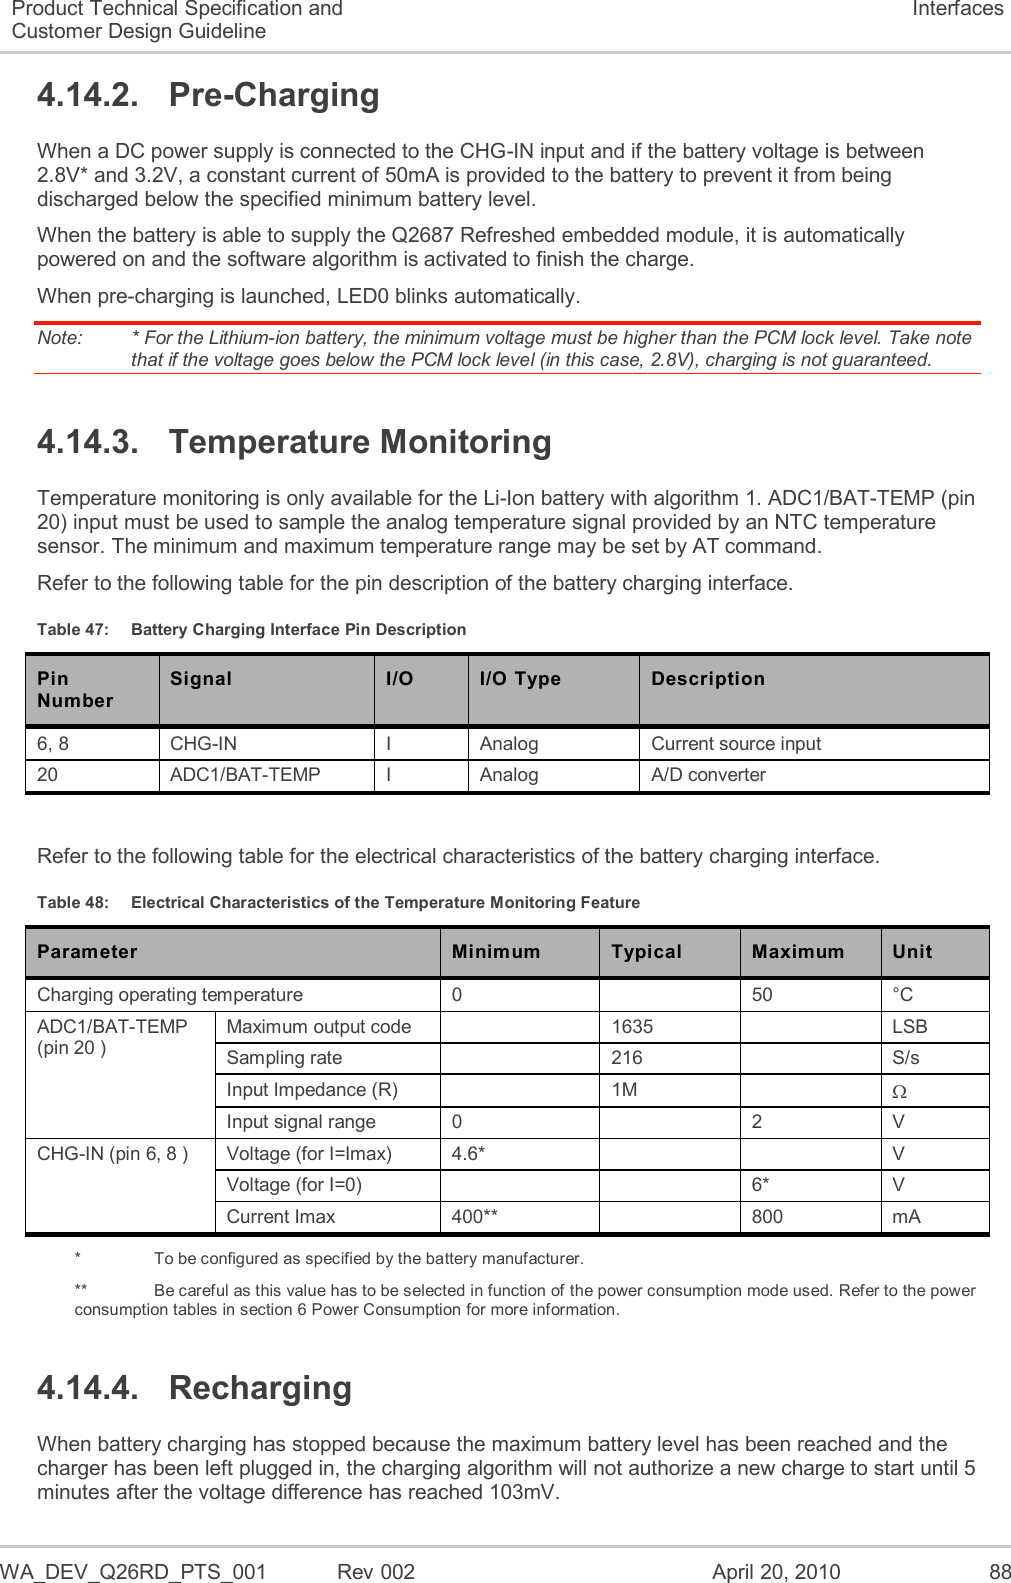  WA_DEV_Q26RD_PTS_001  Rev 002  April 20, 2010 88 Product Technical Specification and Customer Design Guideline Interfaces 4.14.2.  Pre-Charging When a DC power supply is connected to the CHG-IN input and if the battery voltage is between 2.8V* and 3.2V, a constant current of 50mA is provided to the battery to prevent it from being discharged below the specified minimum battery level.  When the battery is able to supply the Q2687 Refreshed embedded module, it is automatically powered on and the software algorithm is activated to finish the charge. When pre-charging is launched, LED0 blinks automatically. Note:   * For the Lithium-ion battery, the minimum voltage must be higher than the PCM lock level. Take note that if the voltage goes below the PCM lock level (in this case, 2.8V), charging is not guaranteed. 4.14.3.  Temperature Monitoring Temperature monitoring is only available for the Li-Ion battery with algorithm 1. ADC1/BAT-TEMP (pin 20) input must be used to sample the analog temperature signal provided by an NTC temperature sensor. The minimum and maximum temperature range may be set by AT command. Refer to the following table for the pin description of the battery charging interface. Table 47:  Battery Charging Interface Pin Description Pin Number Signal I/O I/O Type Description 6, 8 CHG-IN I Analog Current source input 20 ADC1/BAT-TEMP I Analog A/D converter  Refer to the following table for the electrical characteristics of the battery charging interface. Table 48:  Electrical Characteristics of the Temperature Monitoring Feature Parameter Minimum Typical Maximum Unit Charging operating temperature 0  50 °C ADC1/BAT-TEMP (pin 20 ) Maximum output code  1635  LSB Sampling rate  216  S/s Input Impedance (R)  1M   Input signal range 0  2 V CHG-IN (pin 6, 8 ) Voltage (for I=Imax) 4.6*   V Voltage (for I=0)   6* V Current Imax 400**  800 mA *    To be configured as specified by the battery manufacturer. **    Be careful as this value has to be selected in function of the power consumption mode used. Refer to the power consumption tables in section 6 Power Consumption for more information. 4.14.4.  Recharging When battery charging has stopped because the maximum battery level has been reached and the charger has been left plugged in, the charging algorithm will not authorize a new charge to start until 5 minutes after the voltage difference has reached 103mV. 